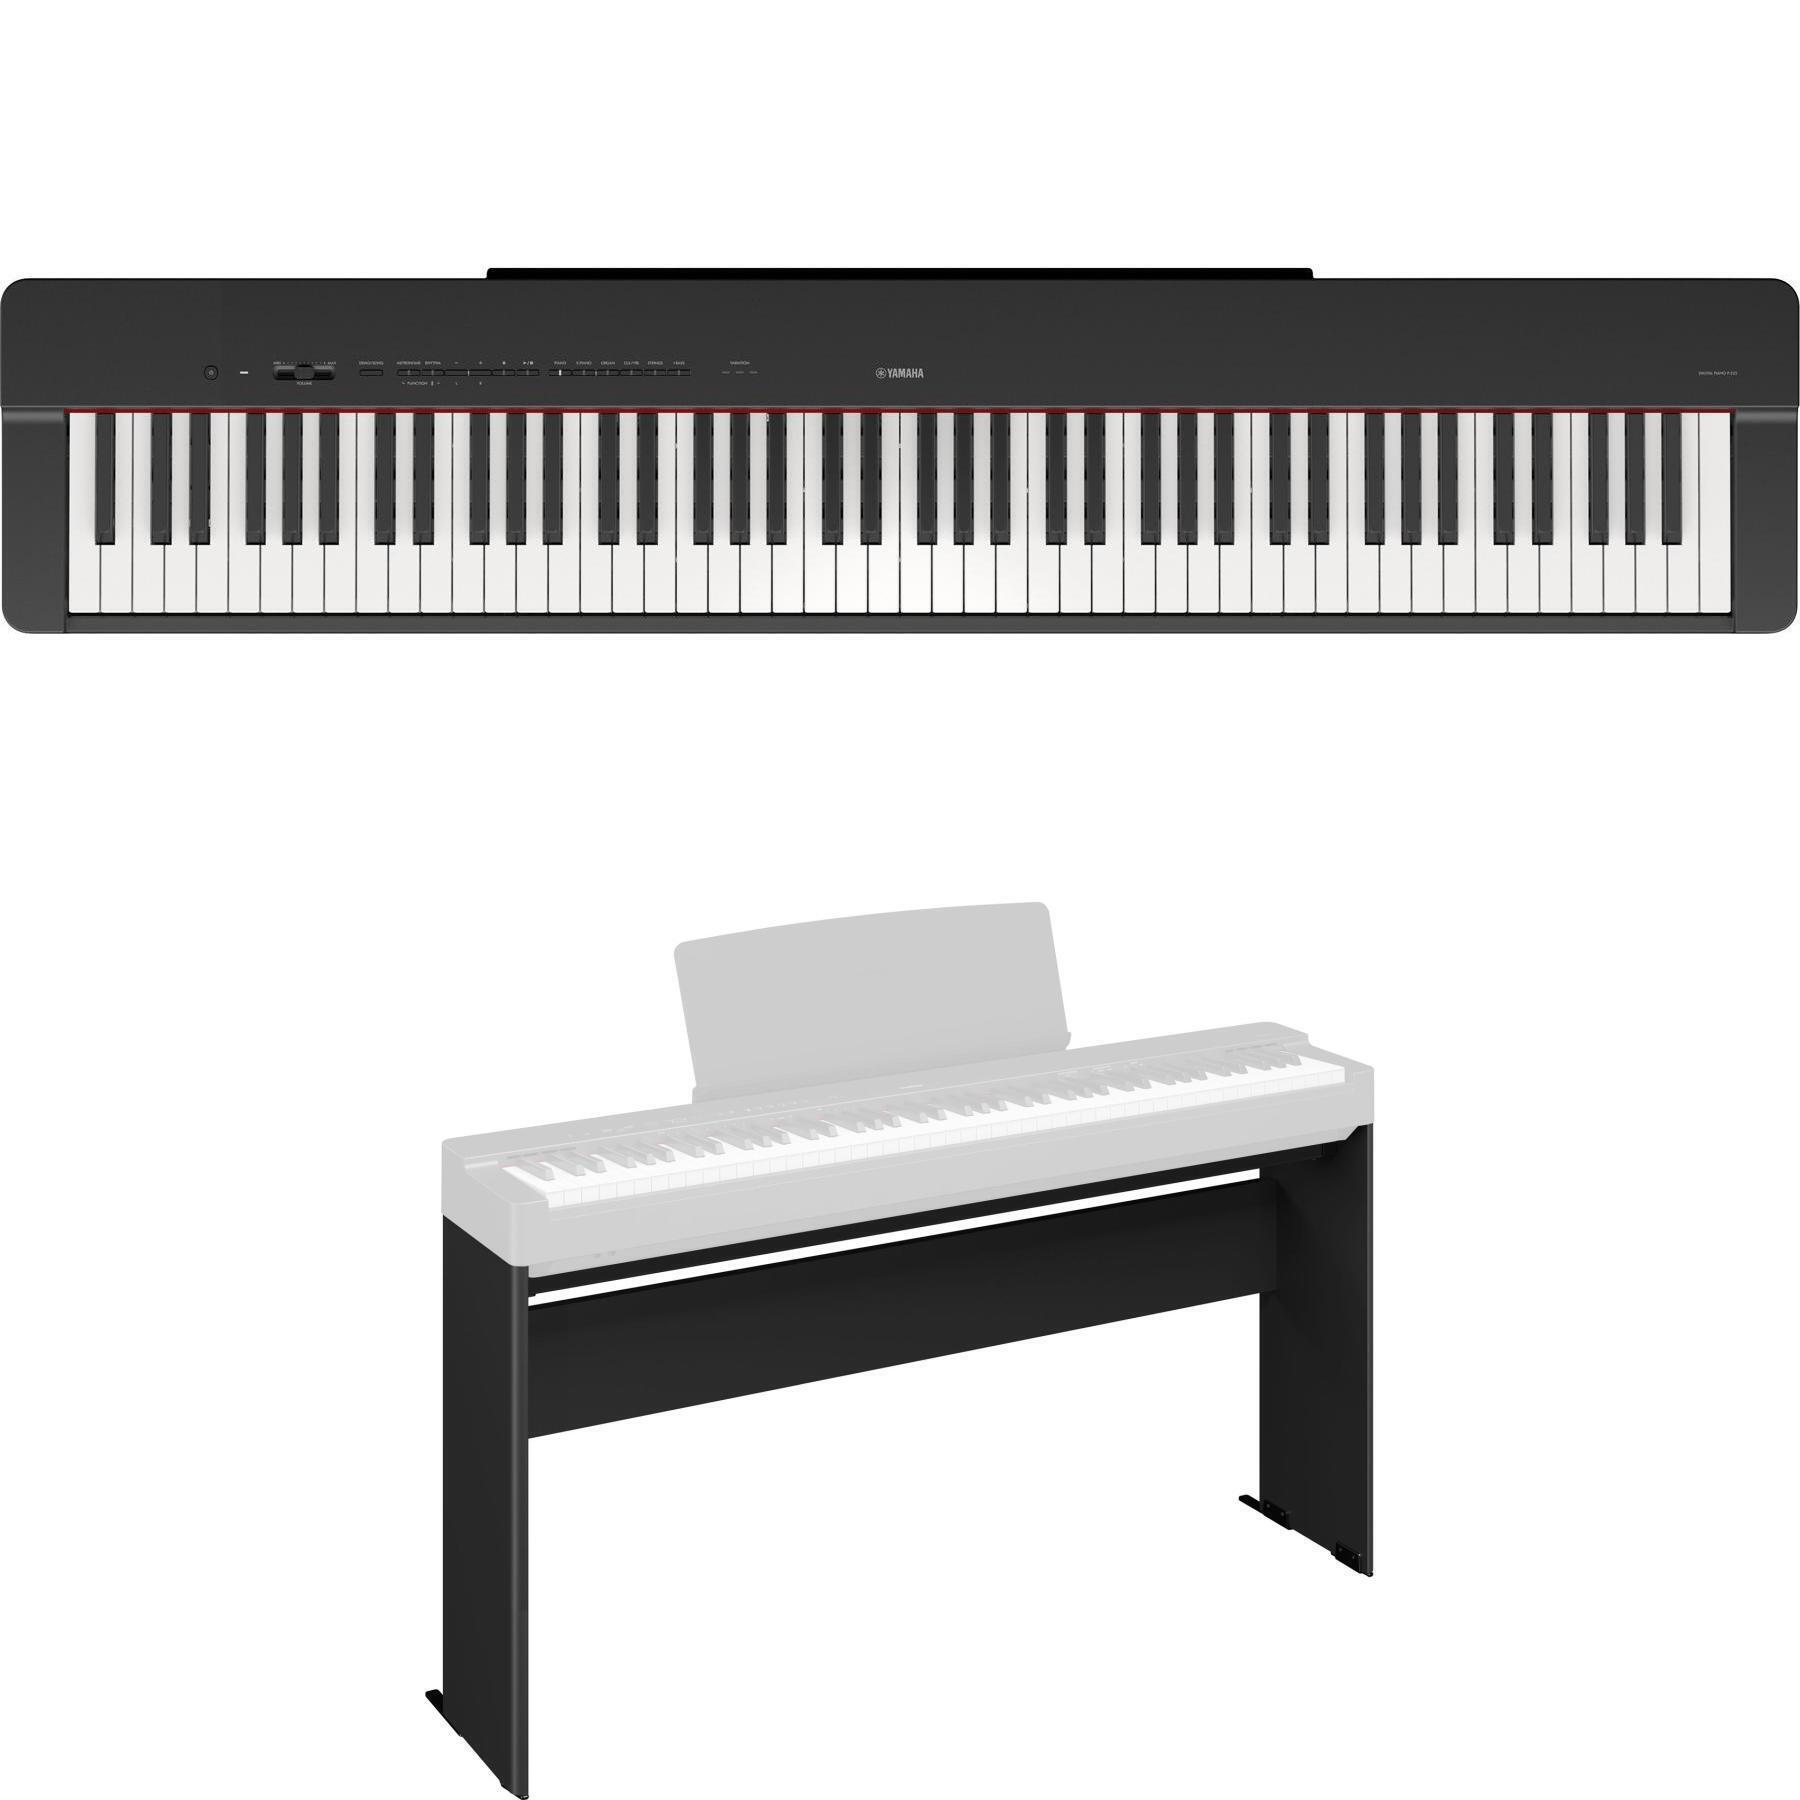 Yamaha P125 vs P225 - How Much Better Is It? 